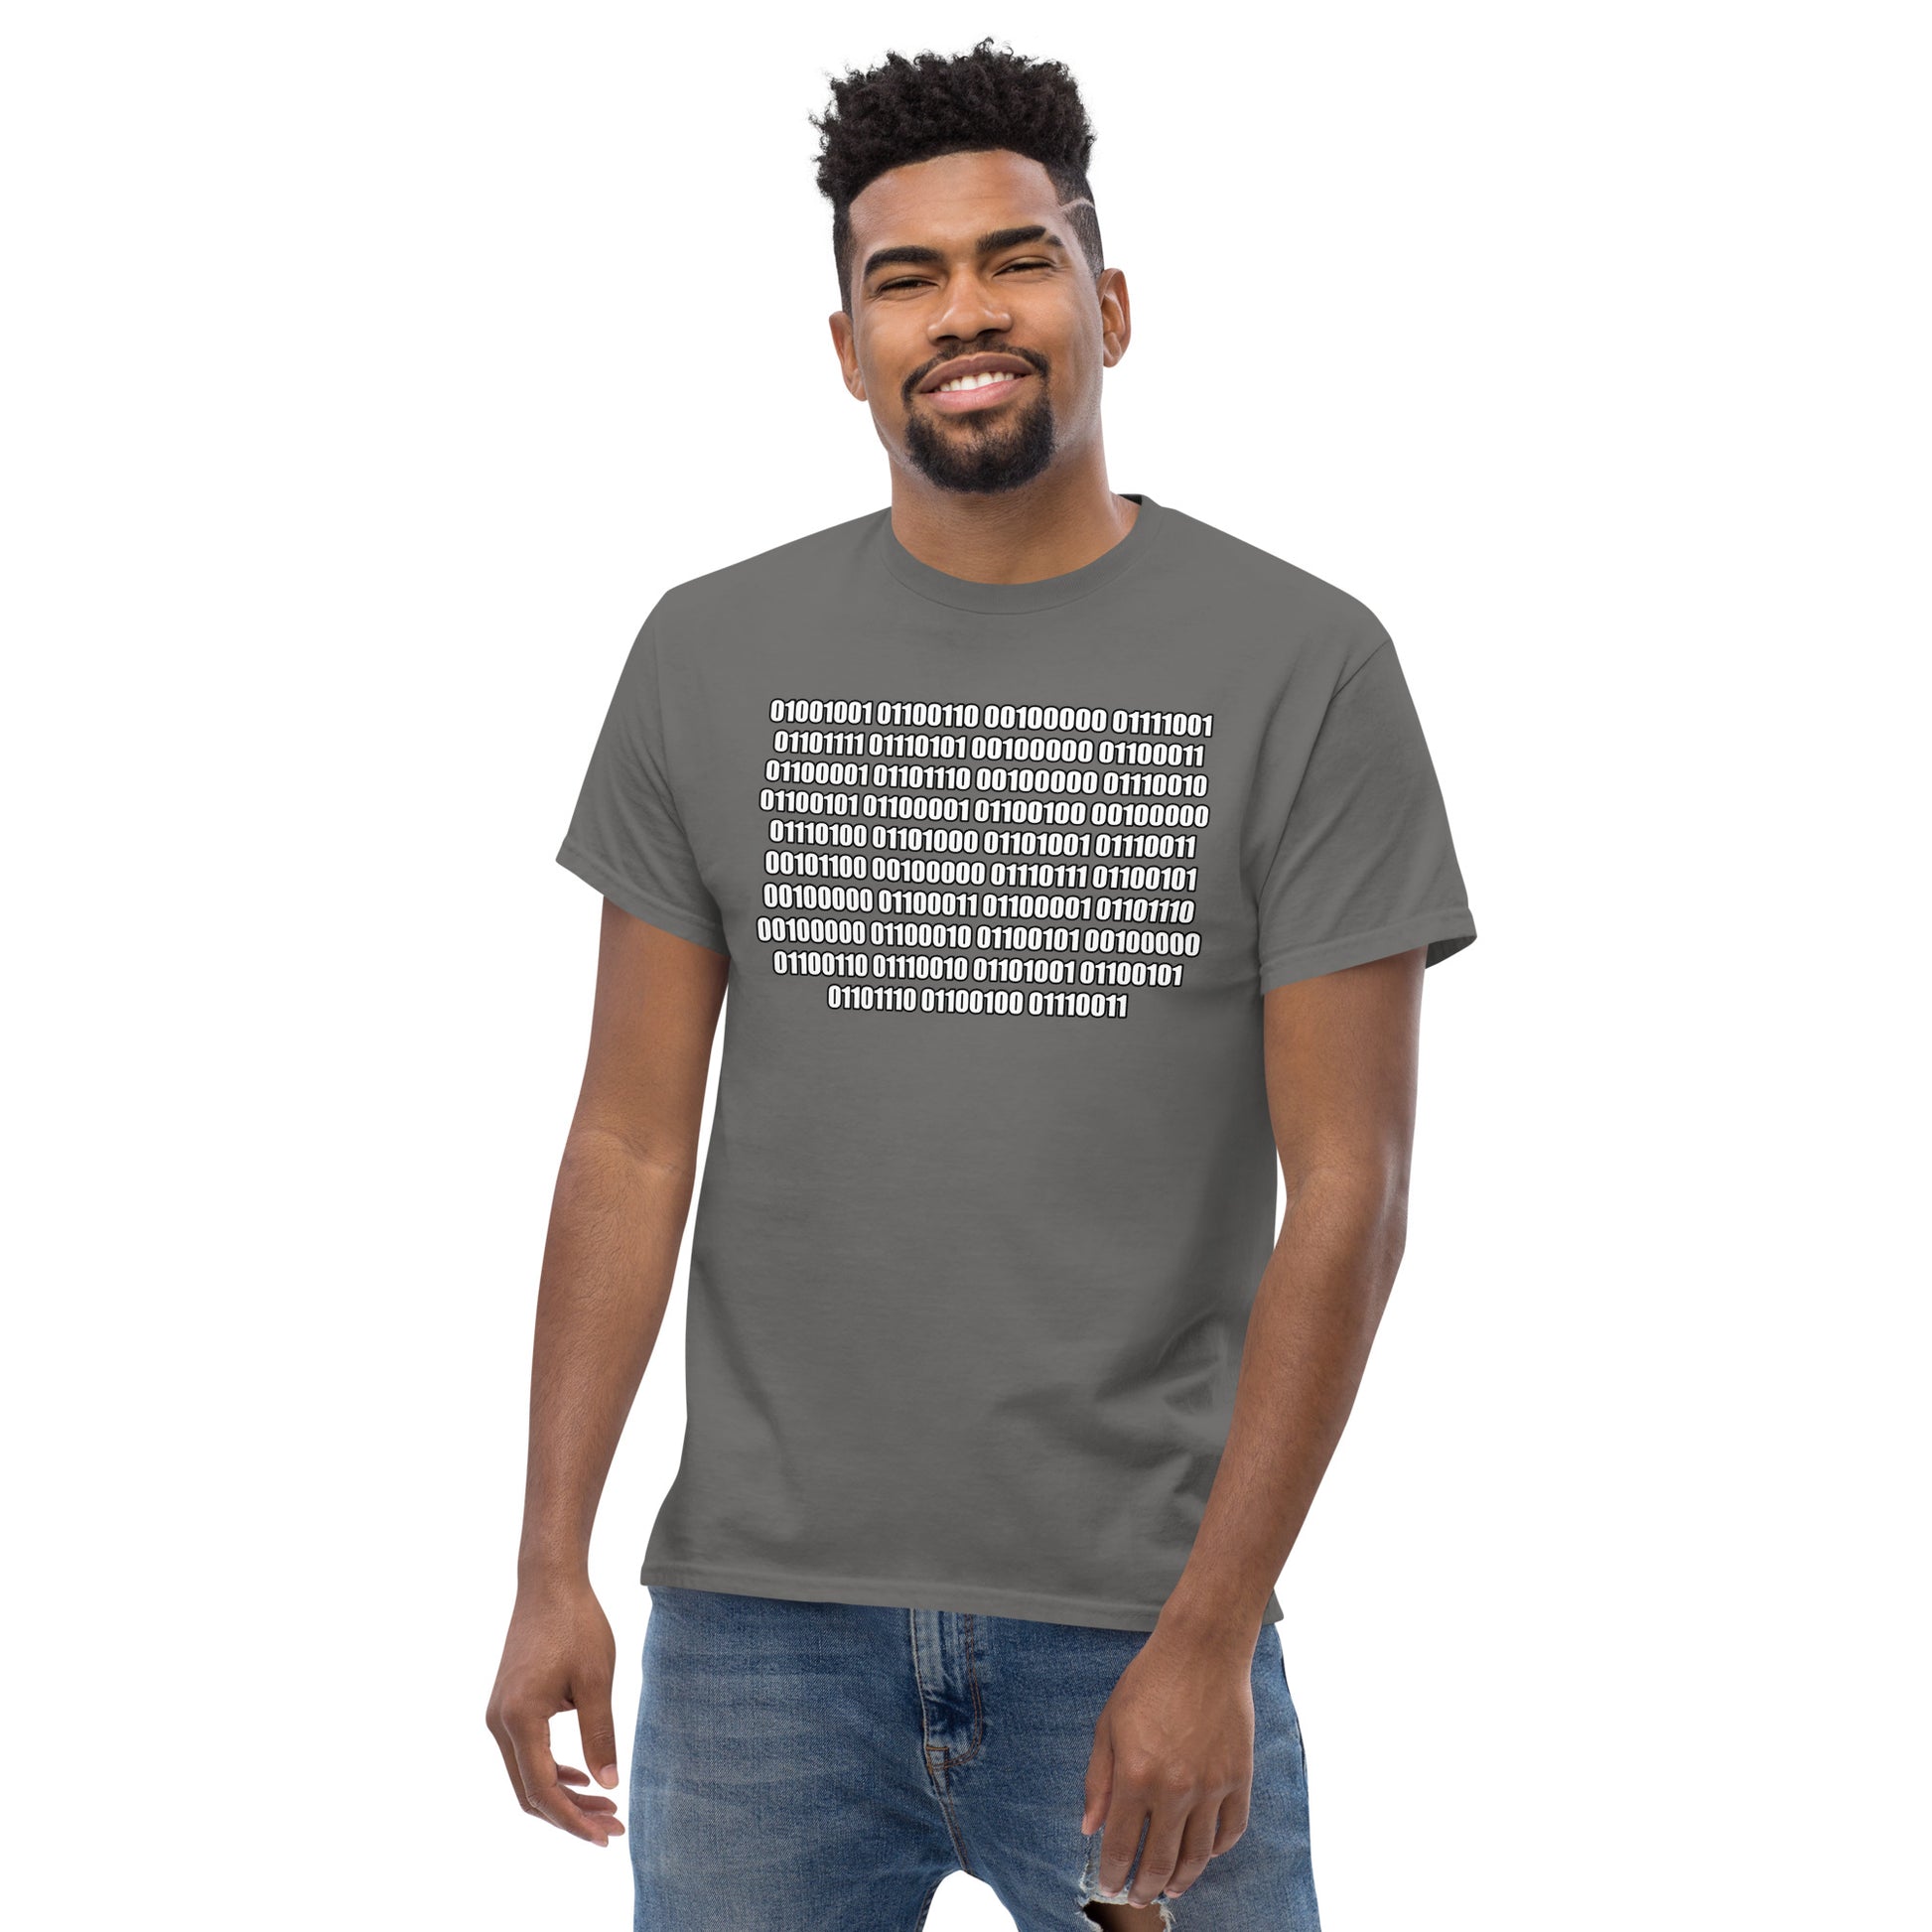 Men with charcoal t-shirt with binaire text "If you can read this"